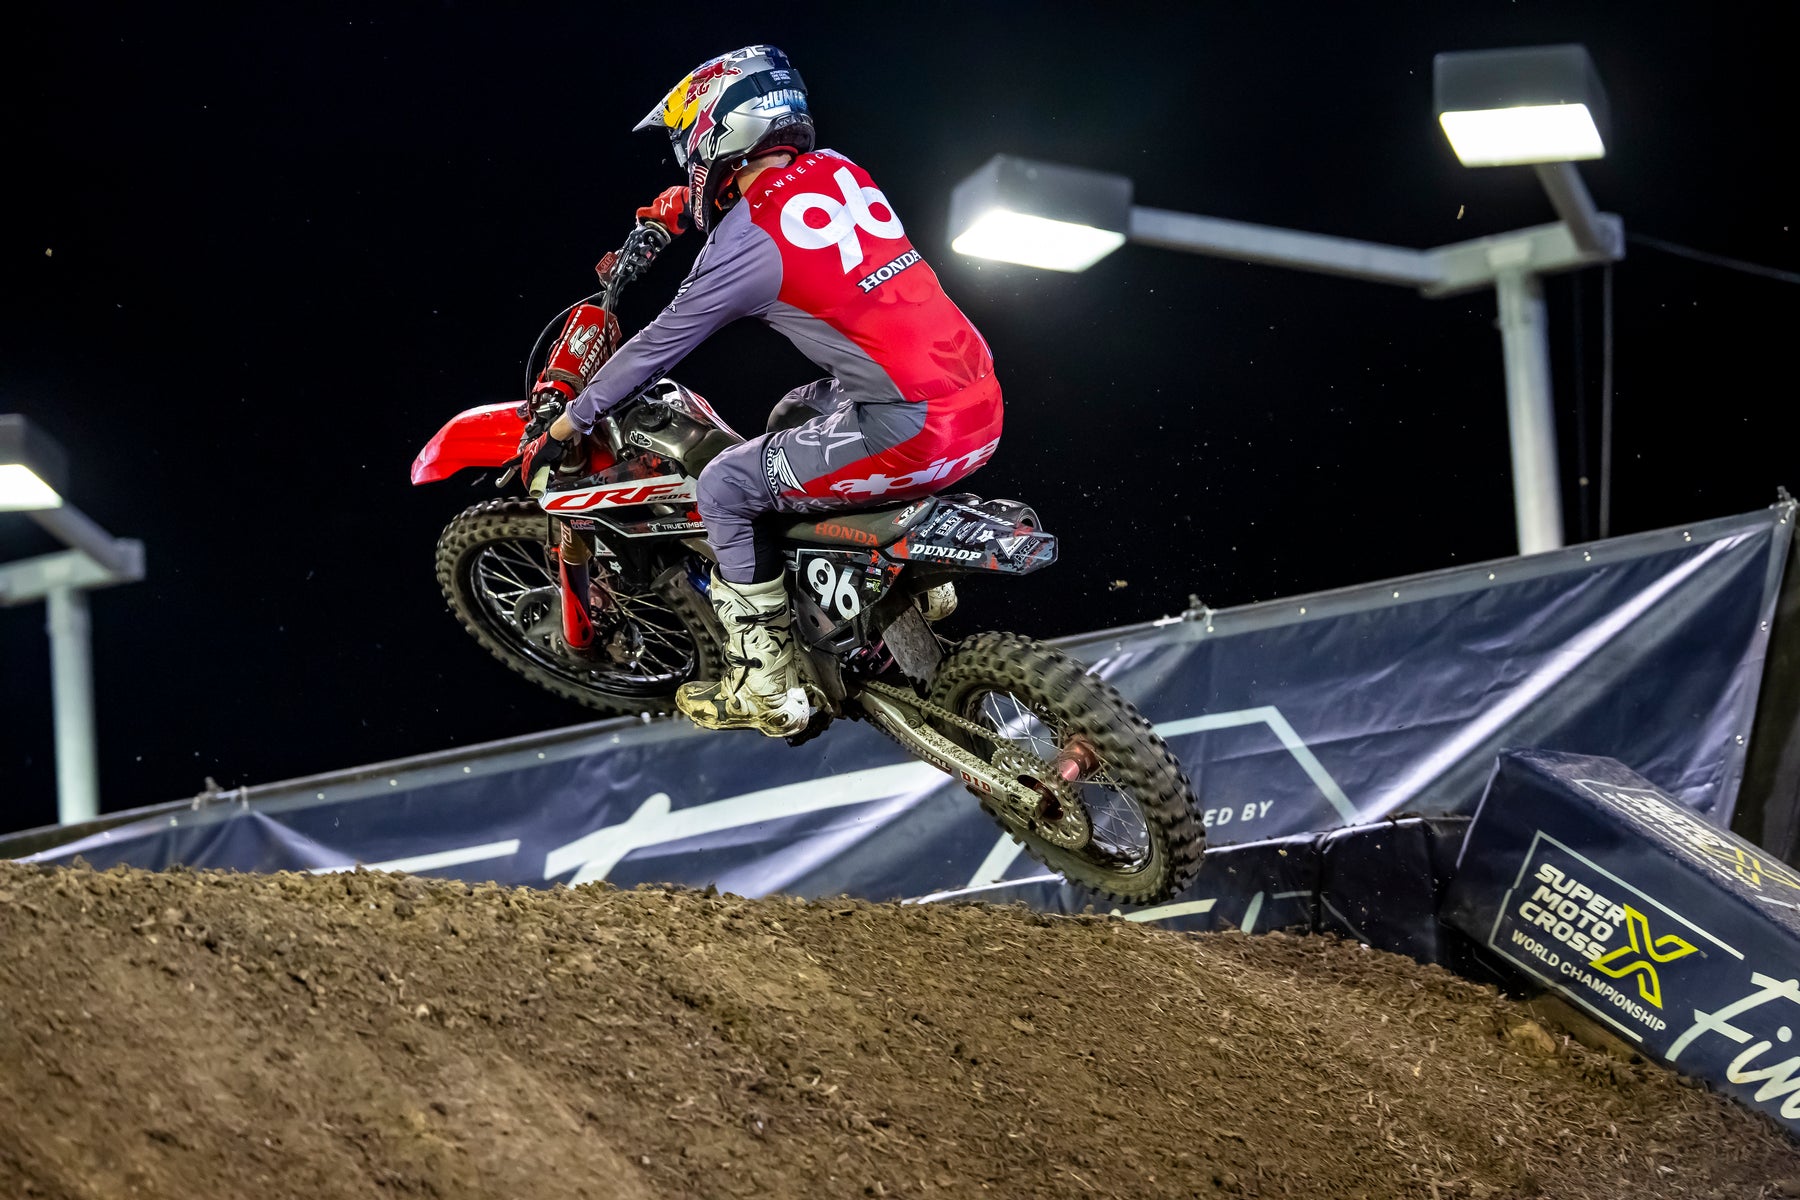 HIGH-FLYING HUNTER LAWRENCE TAKES DOMINANT 250SMX VICTORY IN ILLINOIS